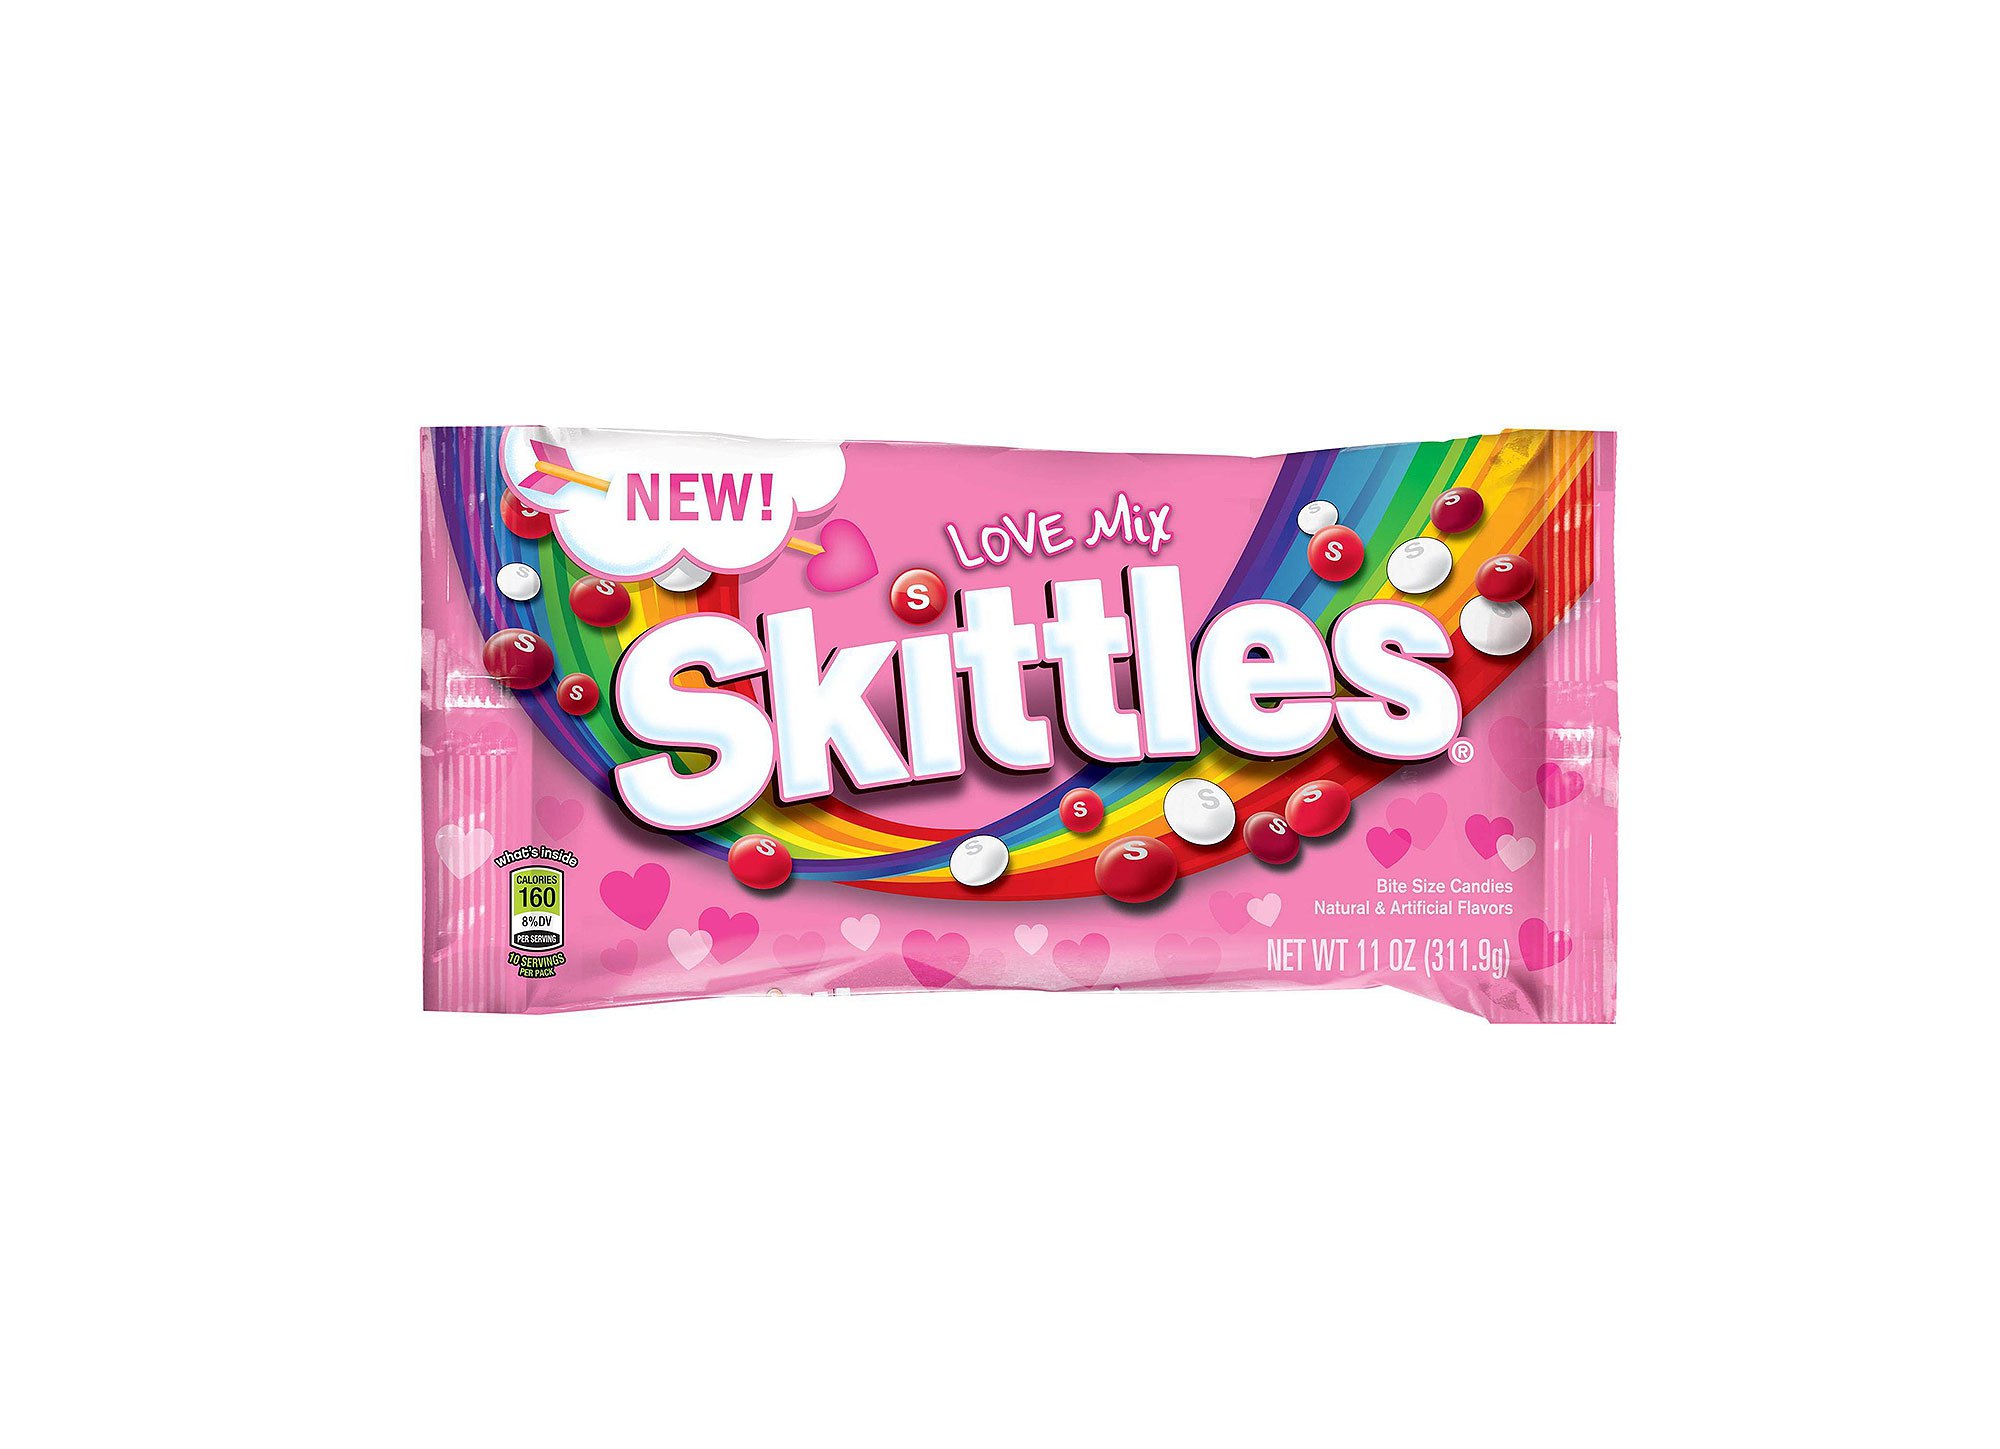 Skittles Just Released a New 'Love Mix' for Valentine's Day | PEOPLE.com